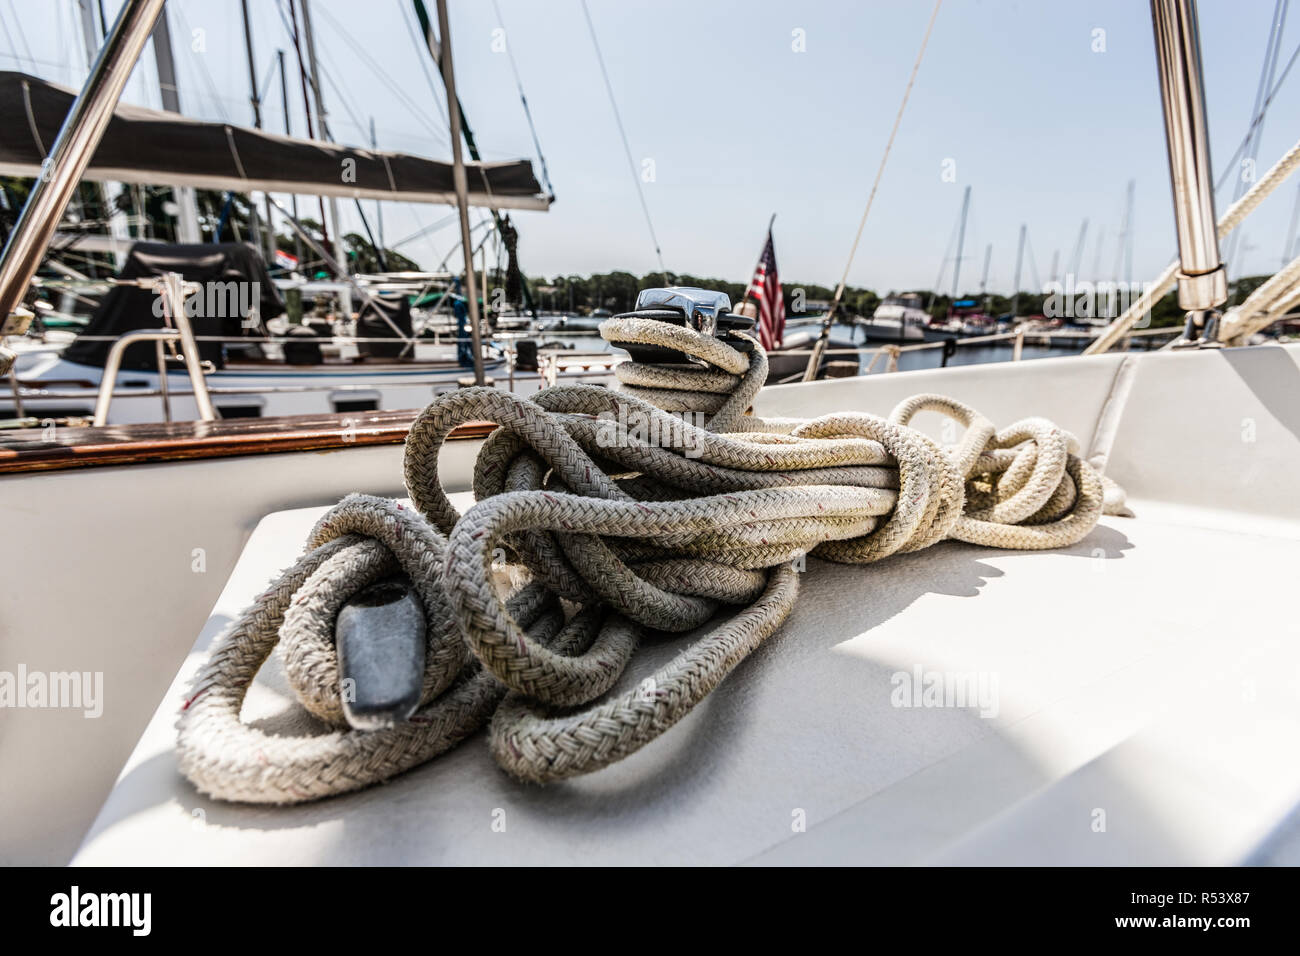 Nautical Cleat and Rope on Sailboat Stock Photo